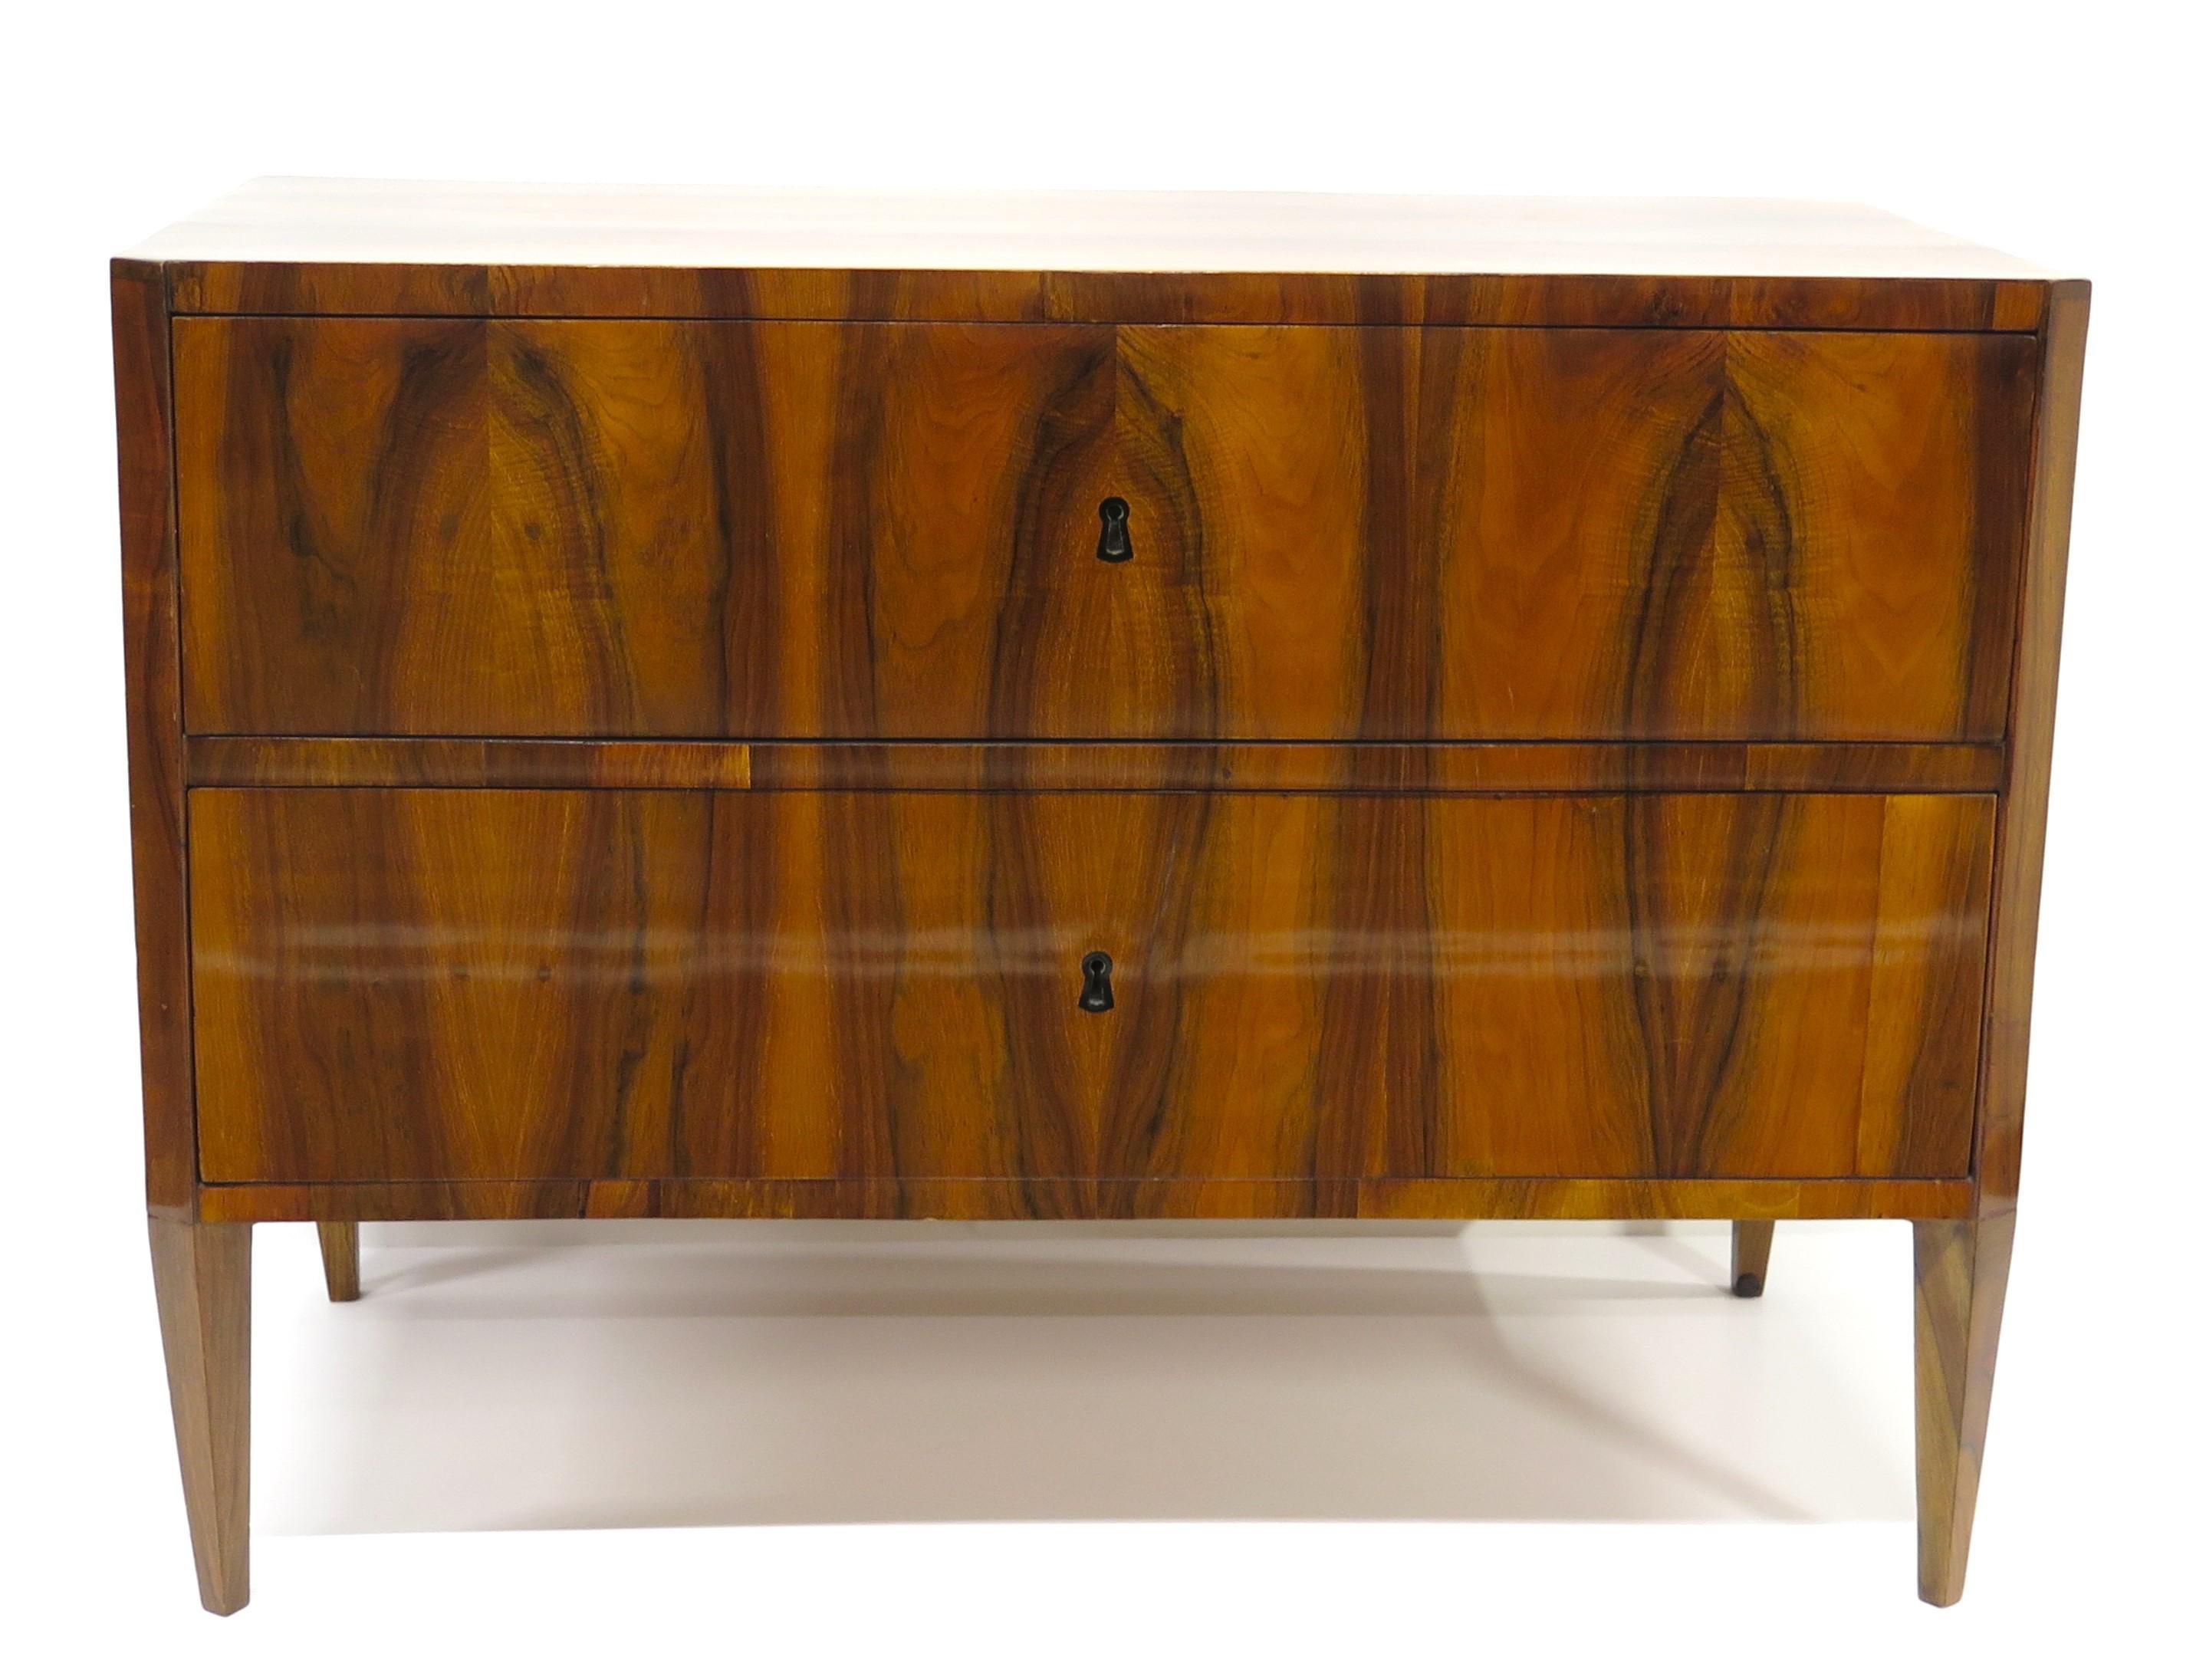 two-drawer Biedermeier commode with handsome bookmatched walnut veneers, exceptional quality on this piece, with a very fine polished finish as well, Germany, circa 1810